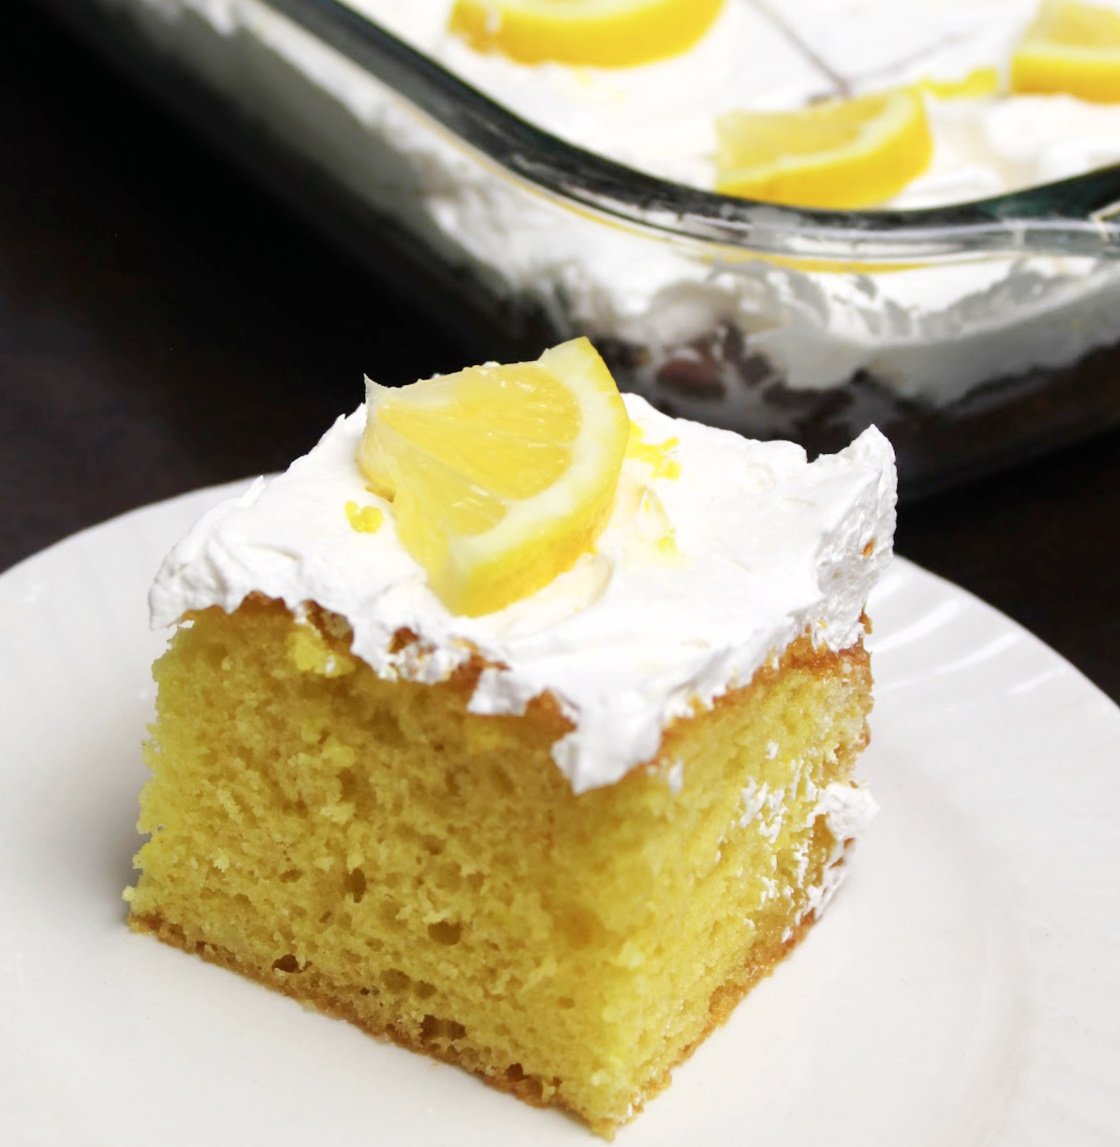 A piece of yellow lemon poke cake with whipped topping and a piece of lemon as a garnish on a white plate.  The pan with the rest of the lemon poke cake in behind and all the cut pieces are garnished with ¼ of a lemon slice.